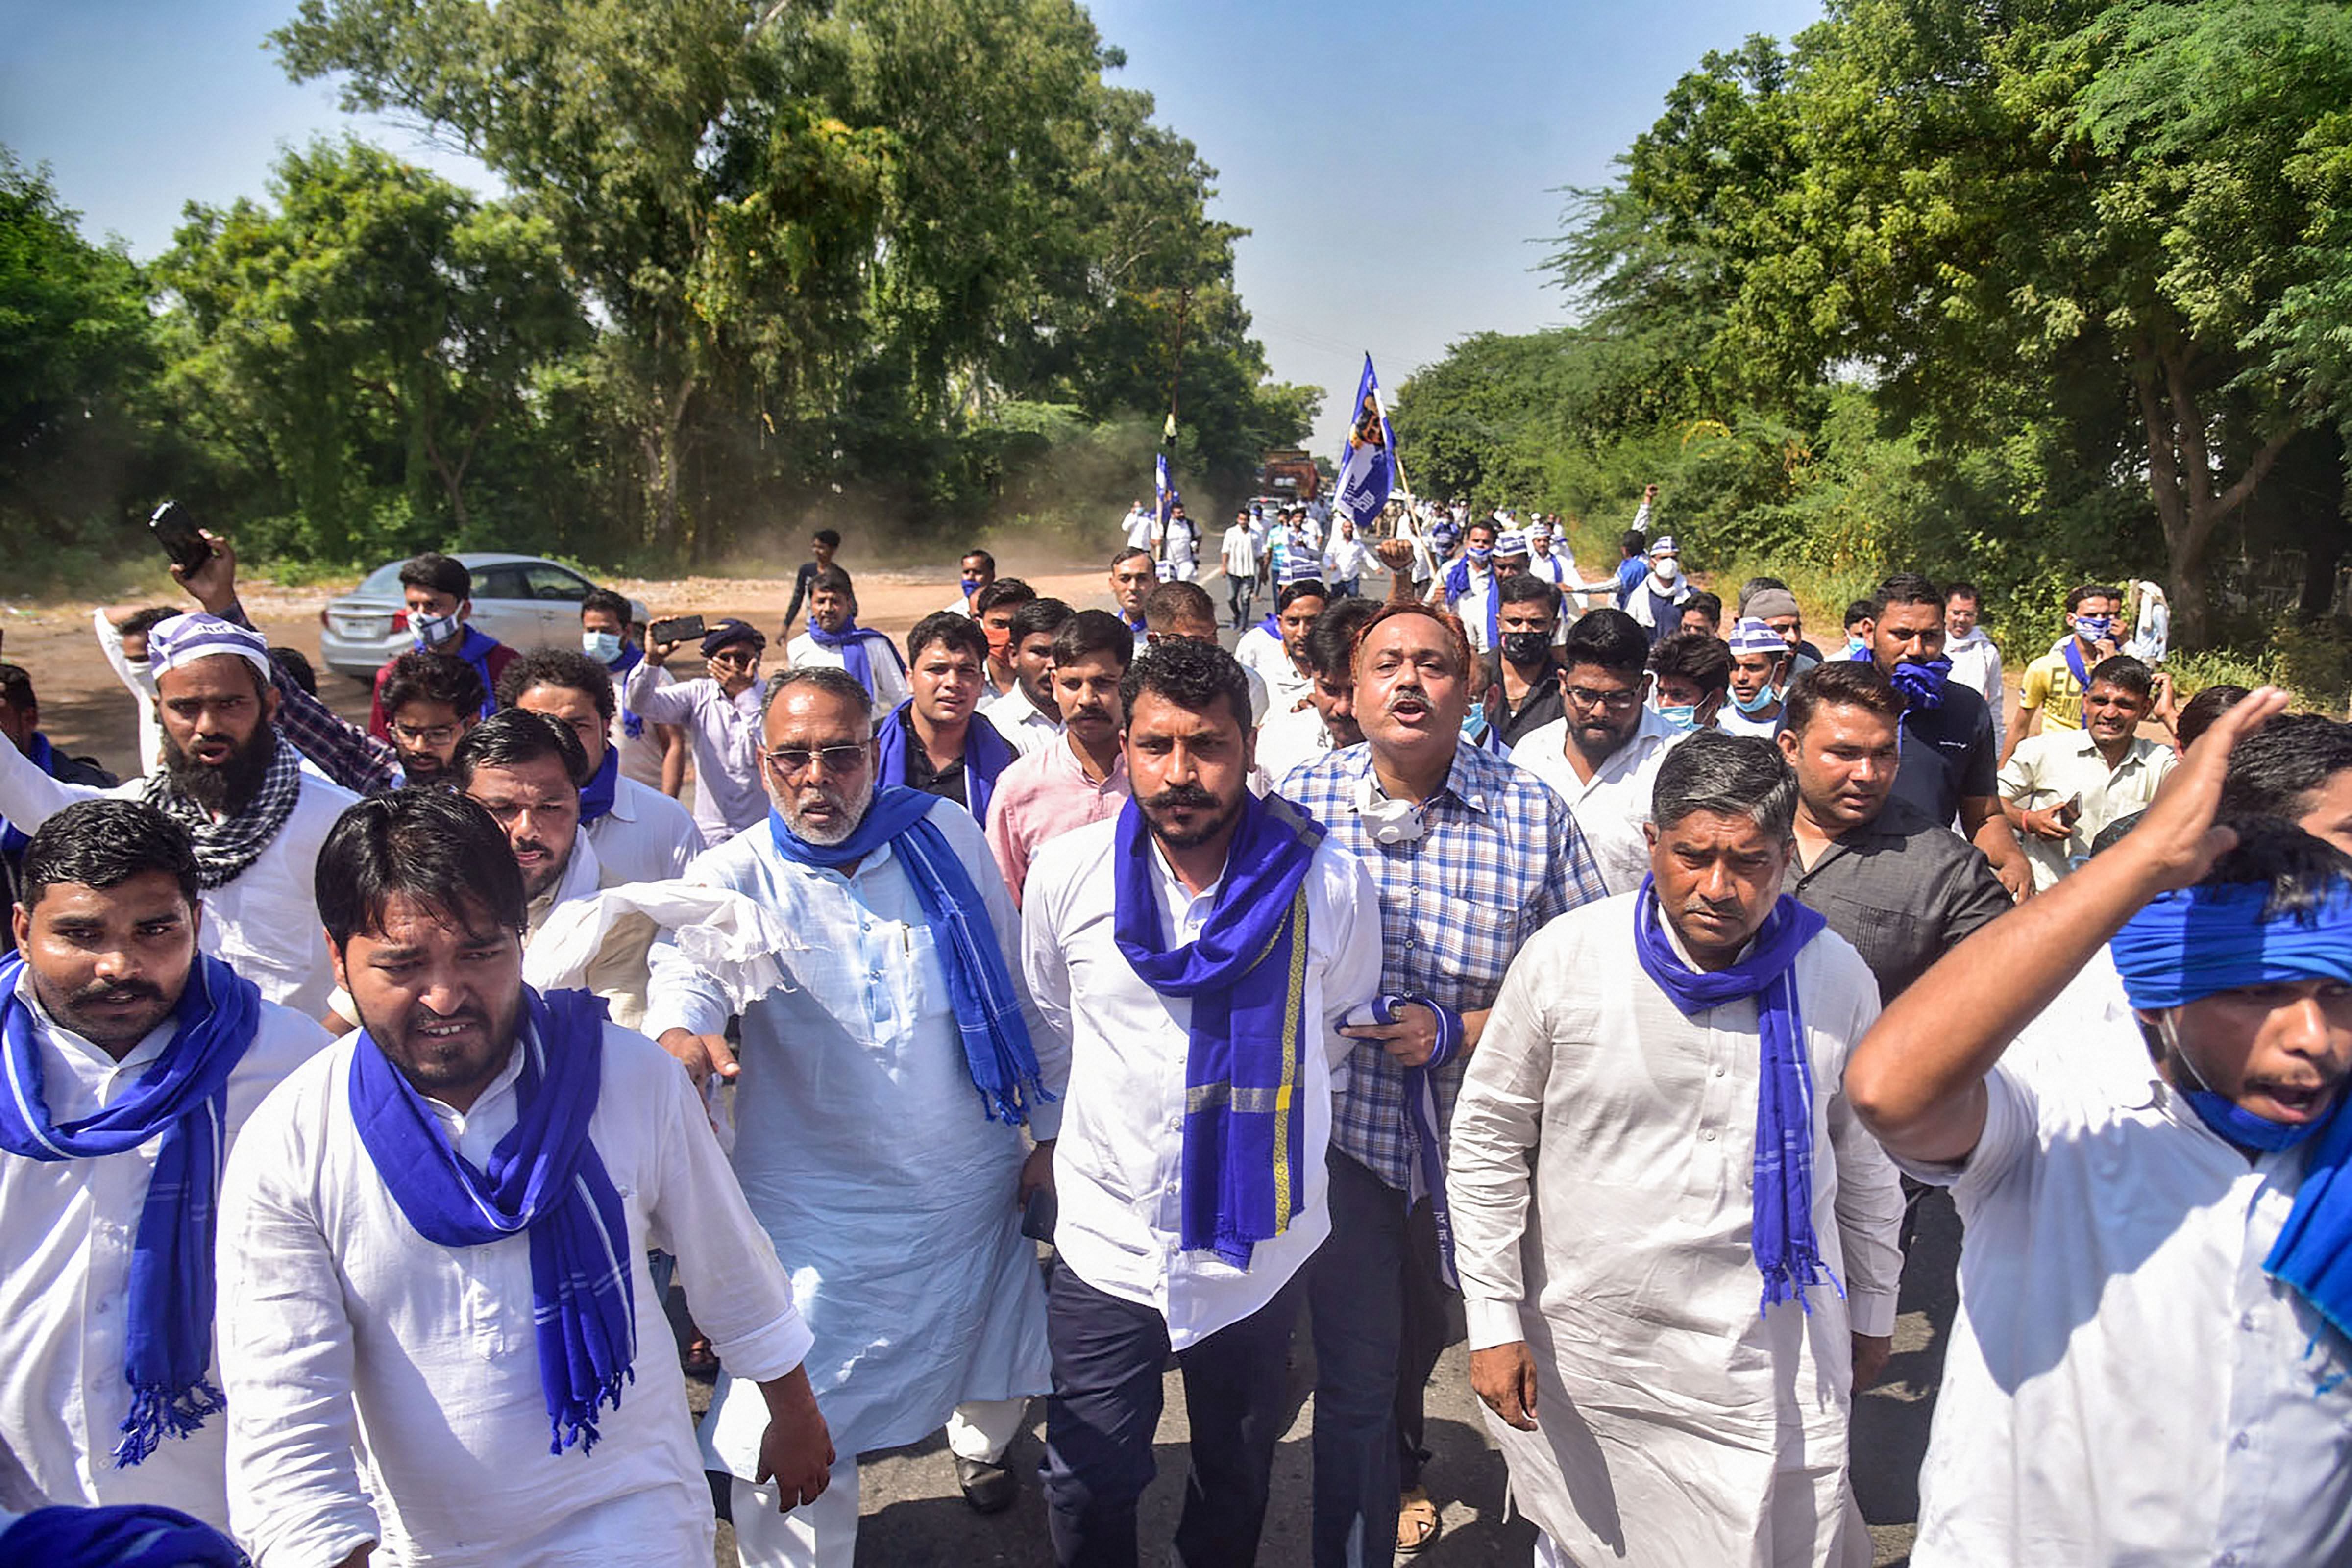 Bhim Army President Chandrashekhar Azad along with party workers on his way to meet the family members of a 19-year-old Dalit woman who died after being allegedly gang-raped two weeks ago, at Sasni road in Hathras, Sunday, Oct. 4, 2020. Credit: PTI Photo